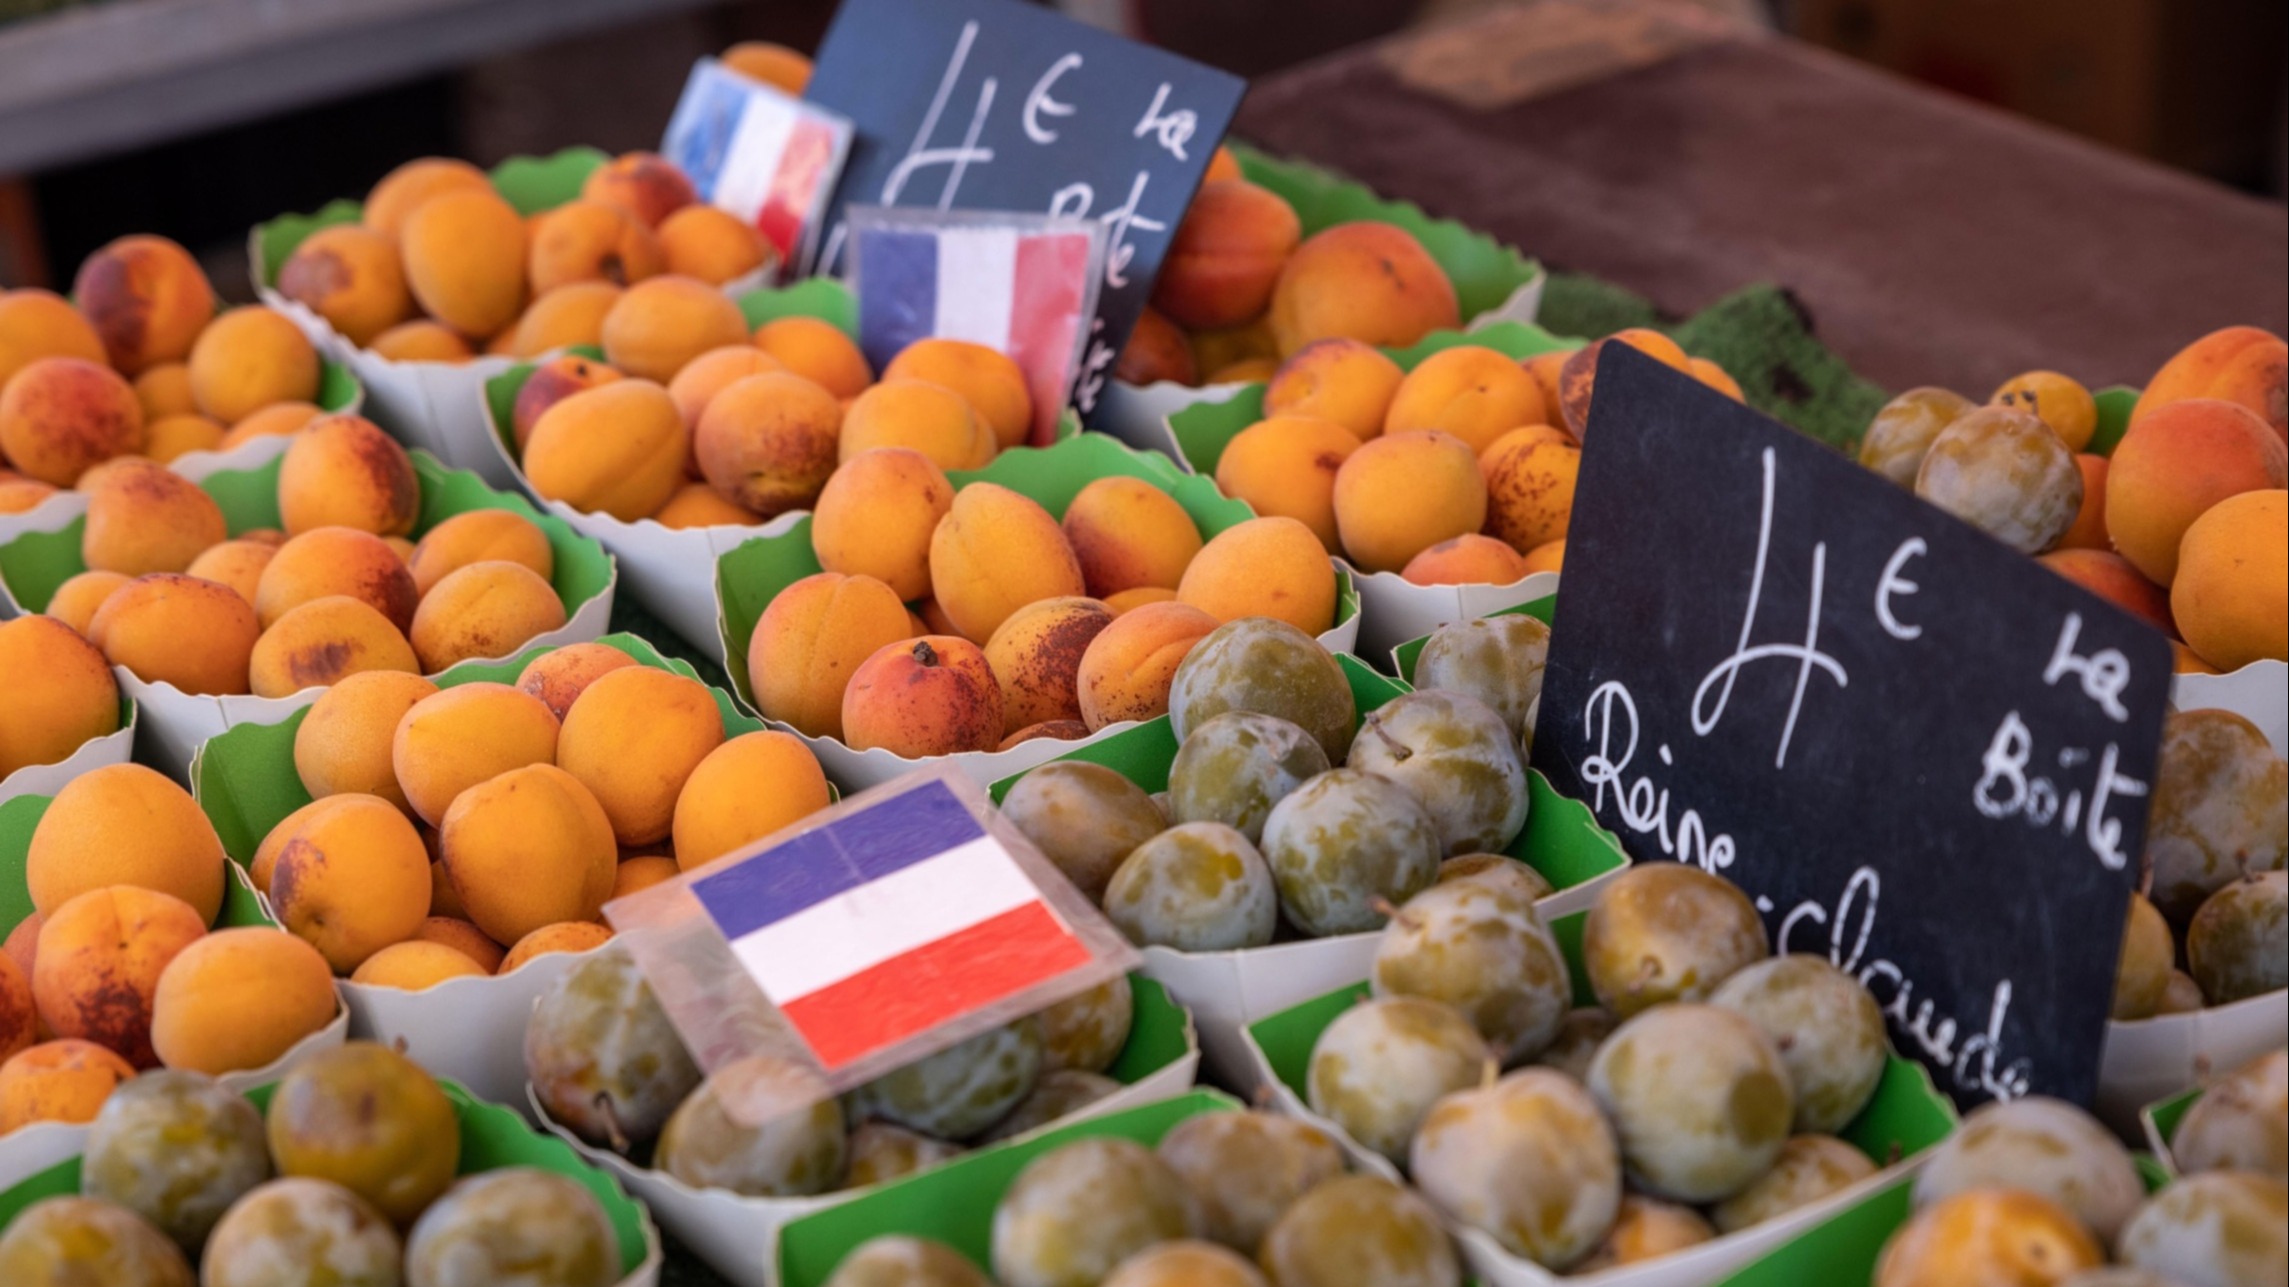 ft.com - Adrienne Klasa - Food producers agree to cut prices in France after government pressure